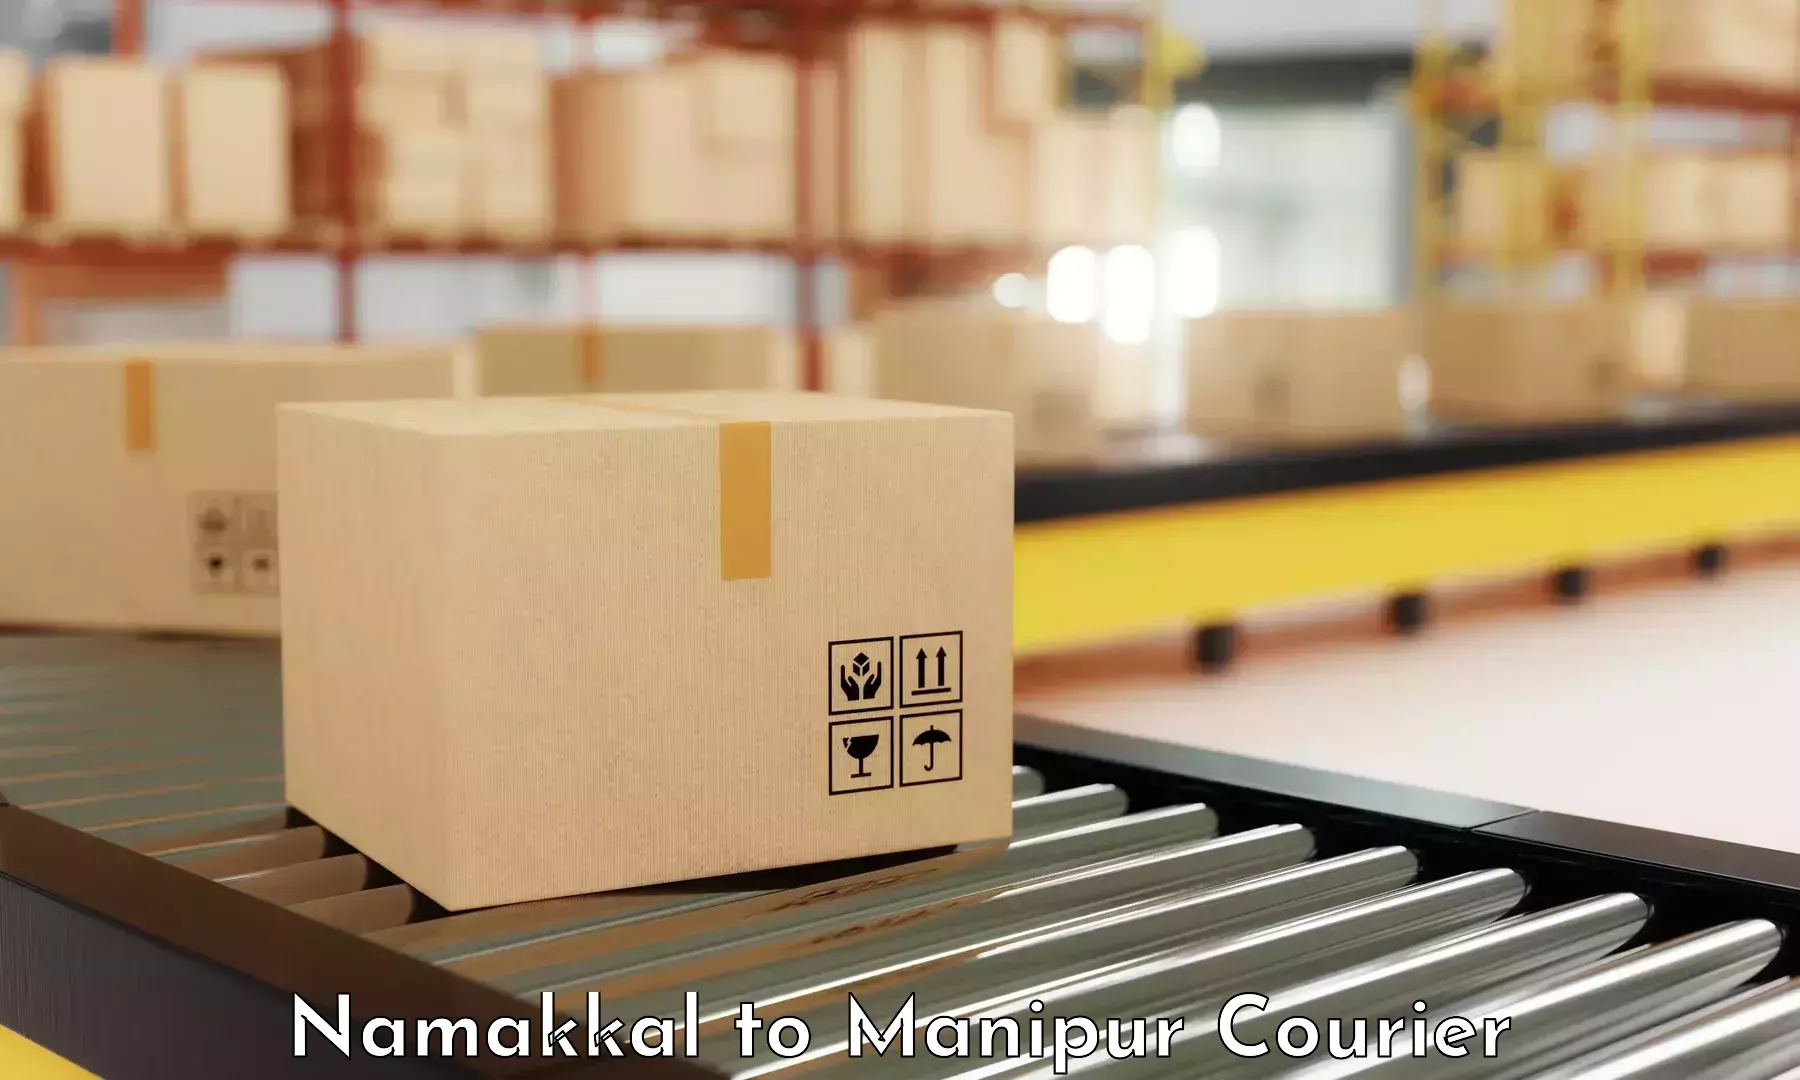 Full-service courier options Namakkal to Manipur